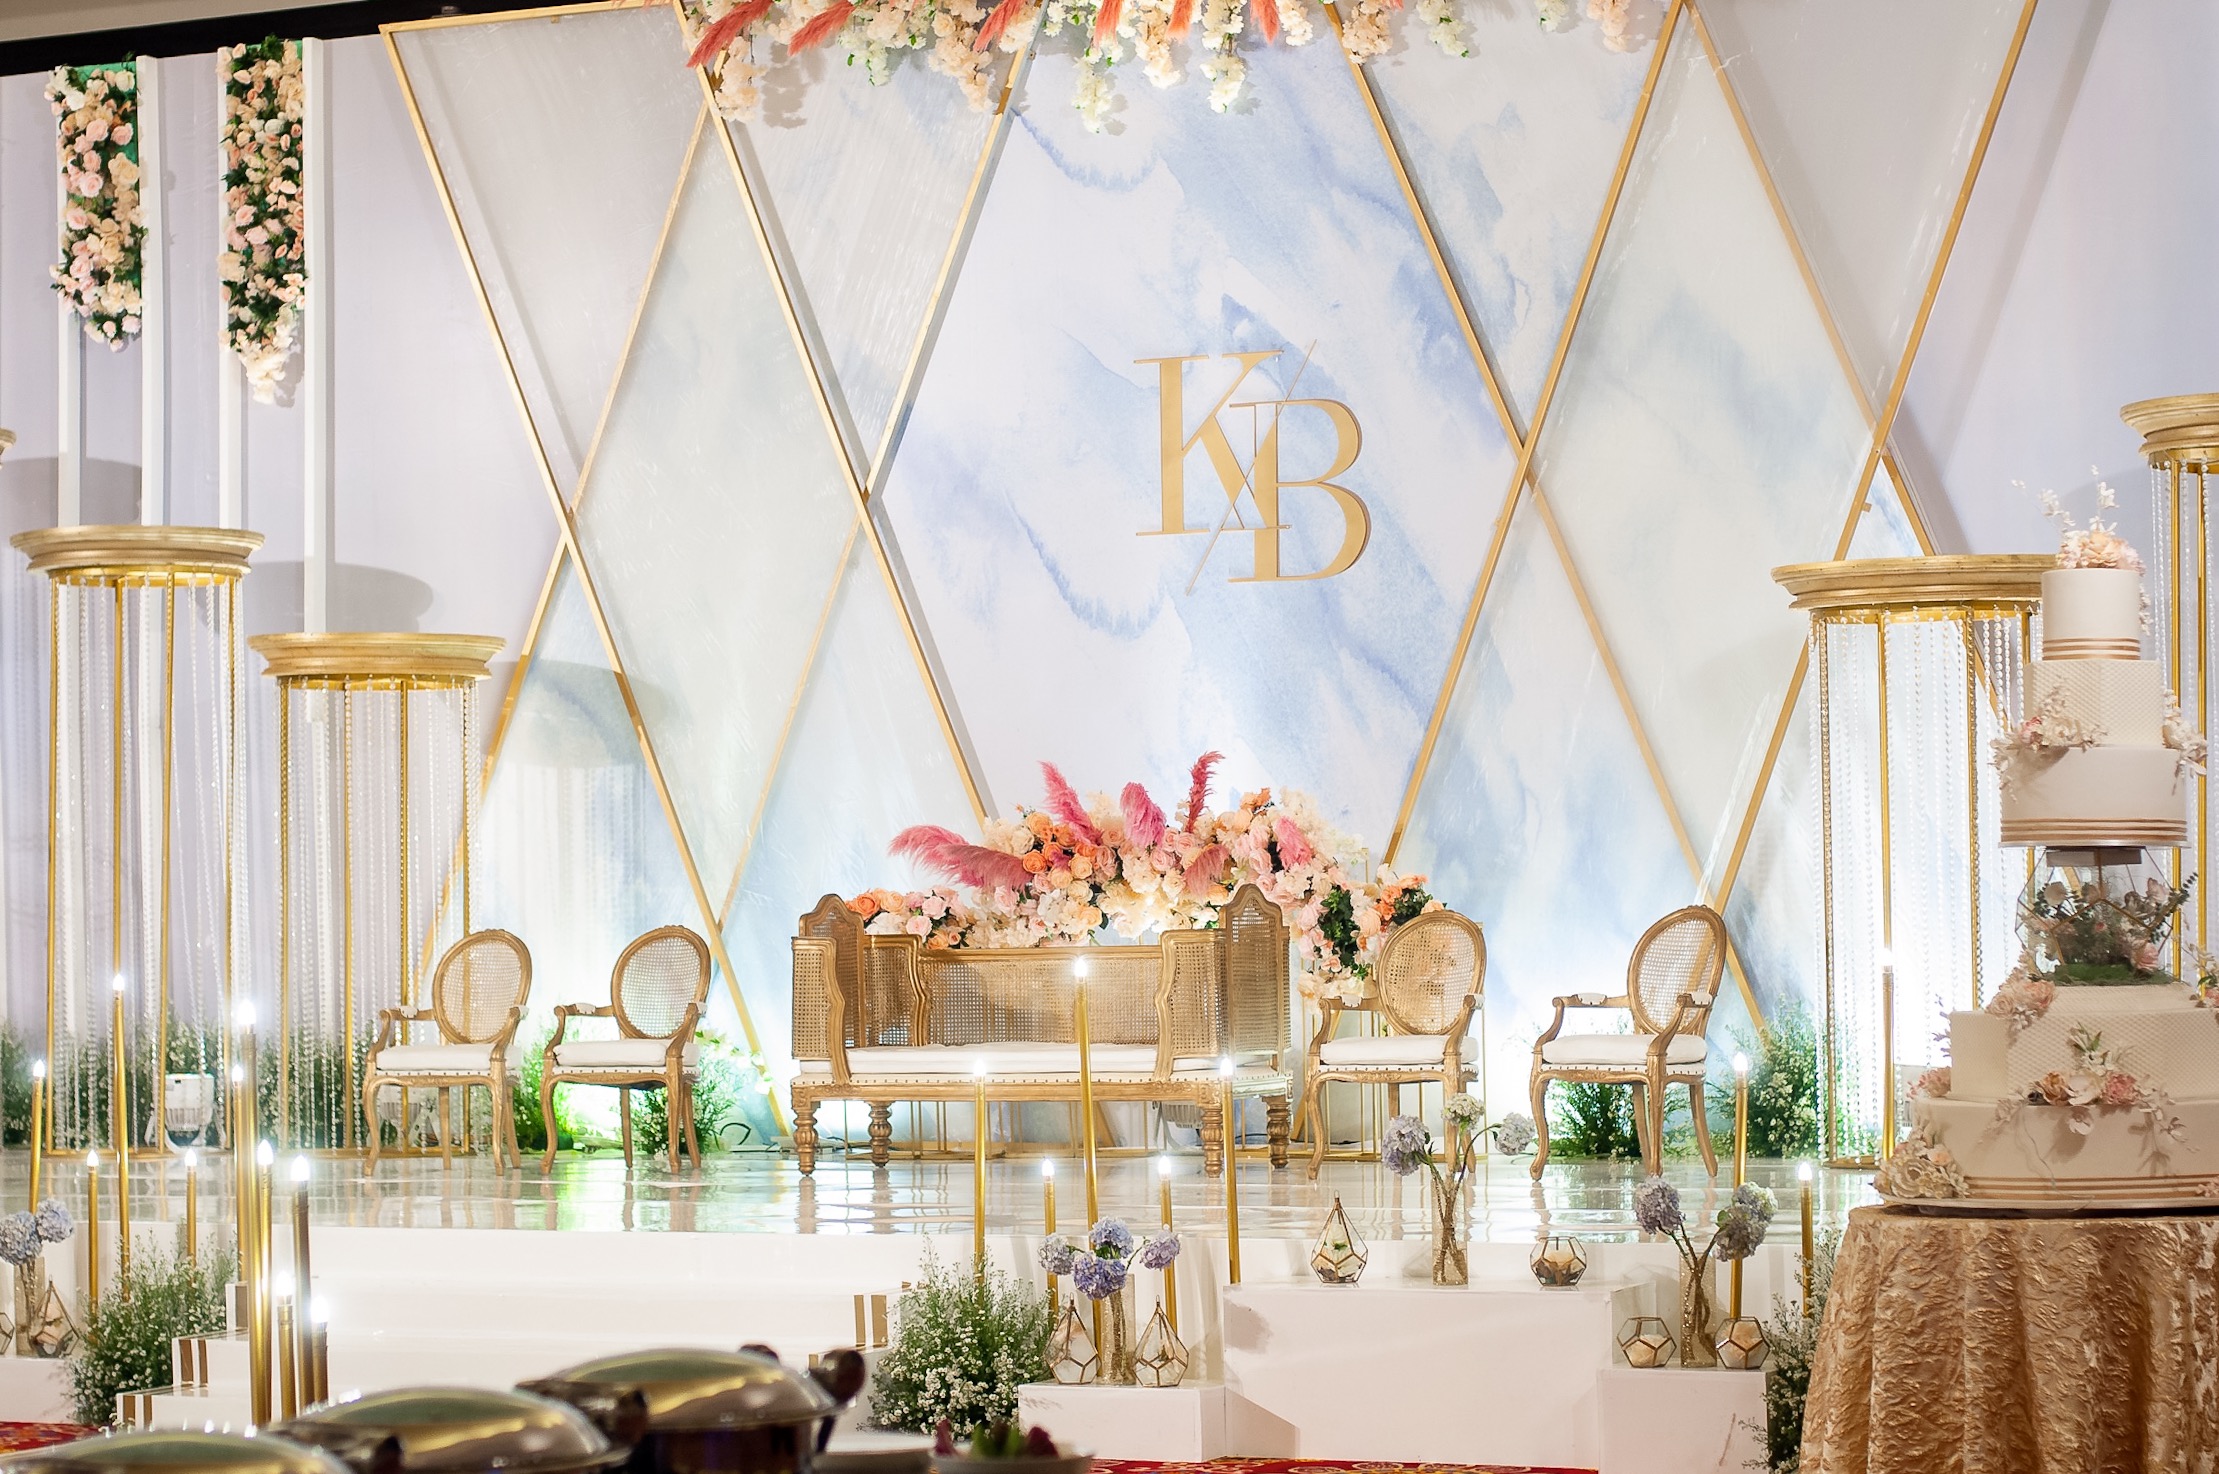 Kevin and Bella's wedding reception // Venue at The Ritz Carlton Jakarta Kuningan // Decoration by The Breath Decoration // Lighting by Lightworks